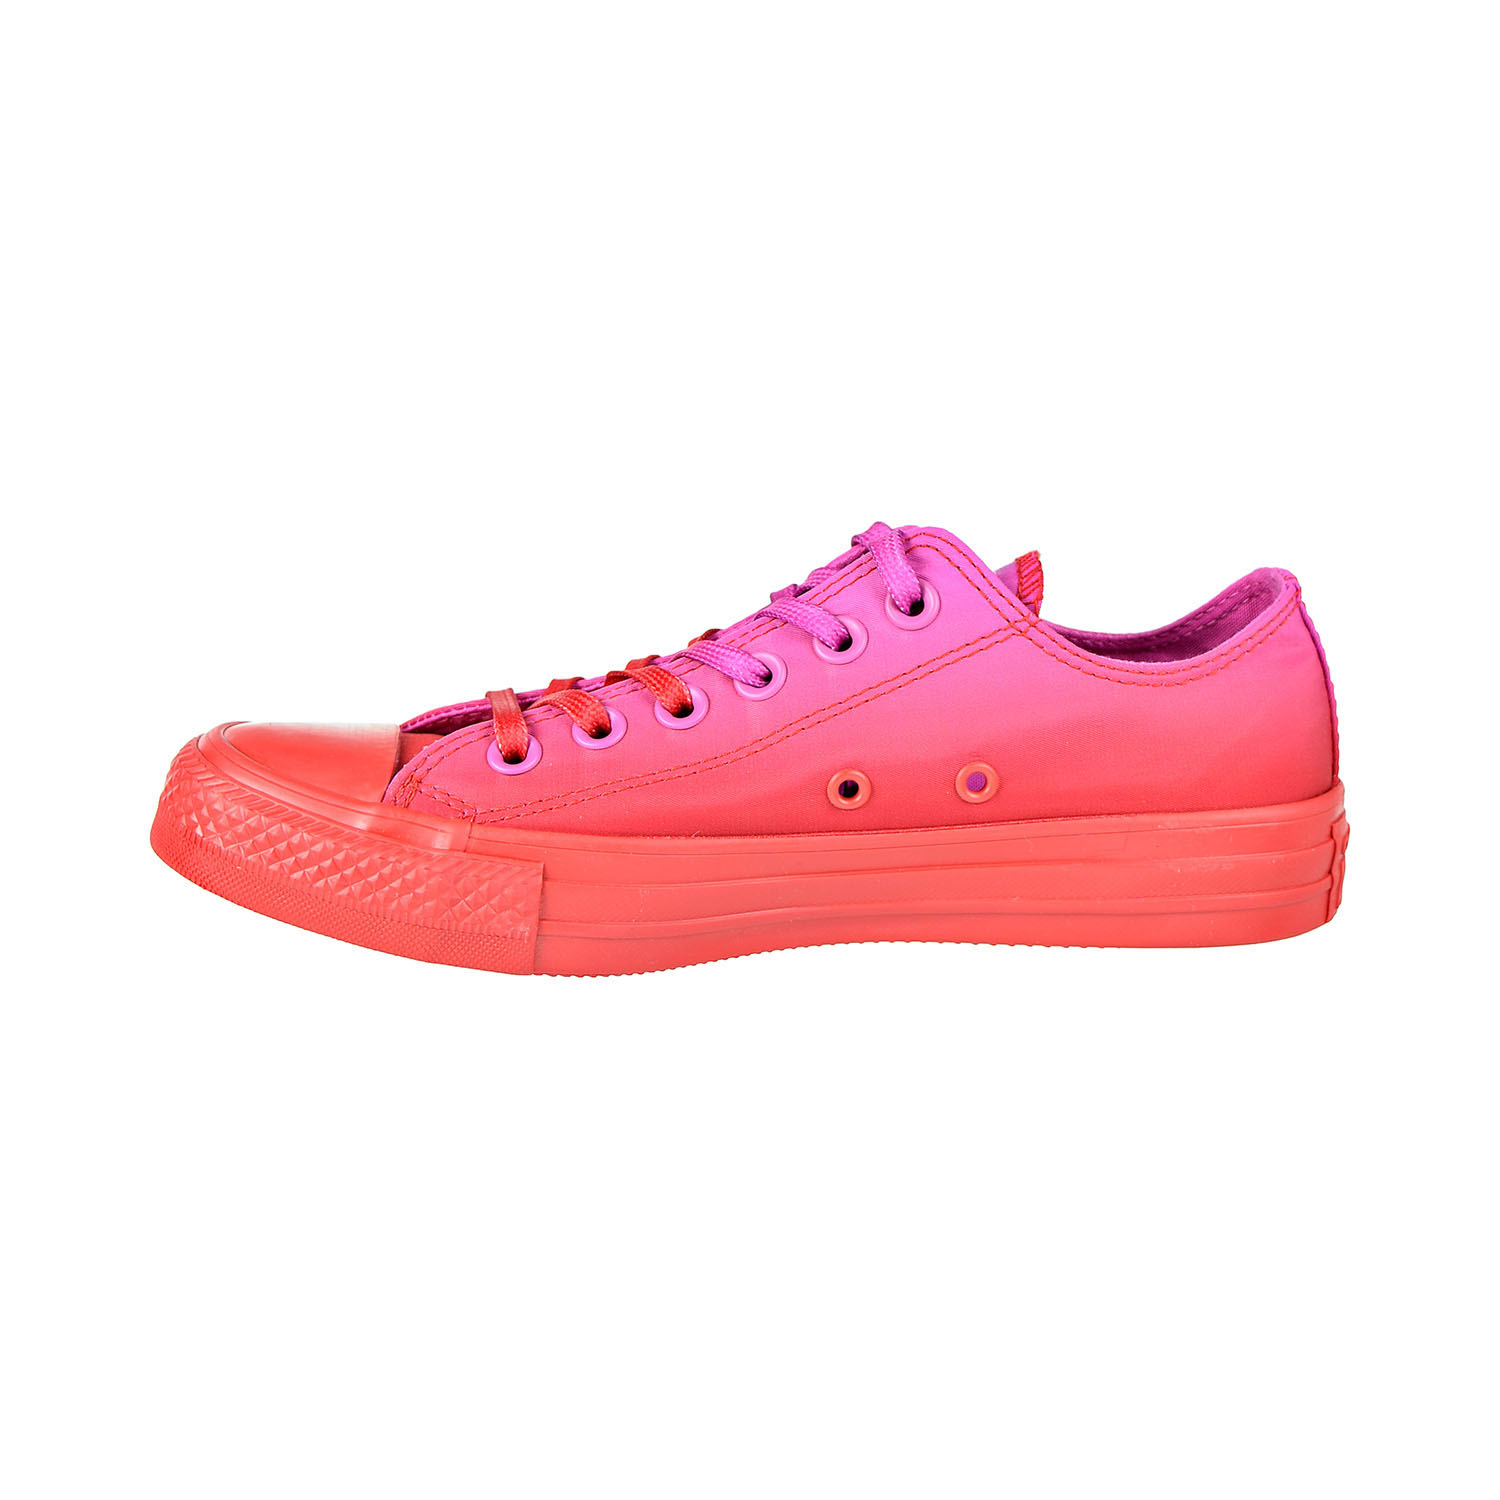 Converse Chuck Taylor All Star Ox Men's Shoes Active Fuchsia-Enamel Red 163290c - image 4 of 6